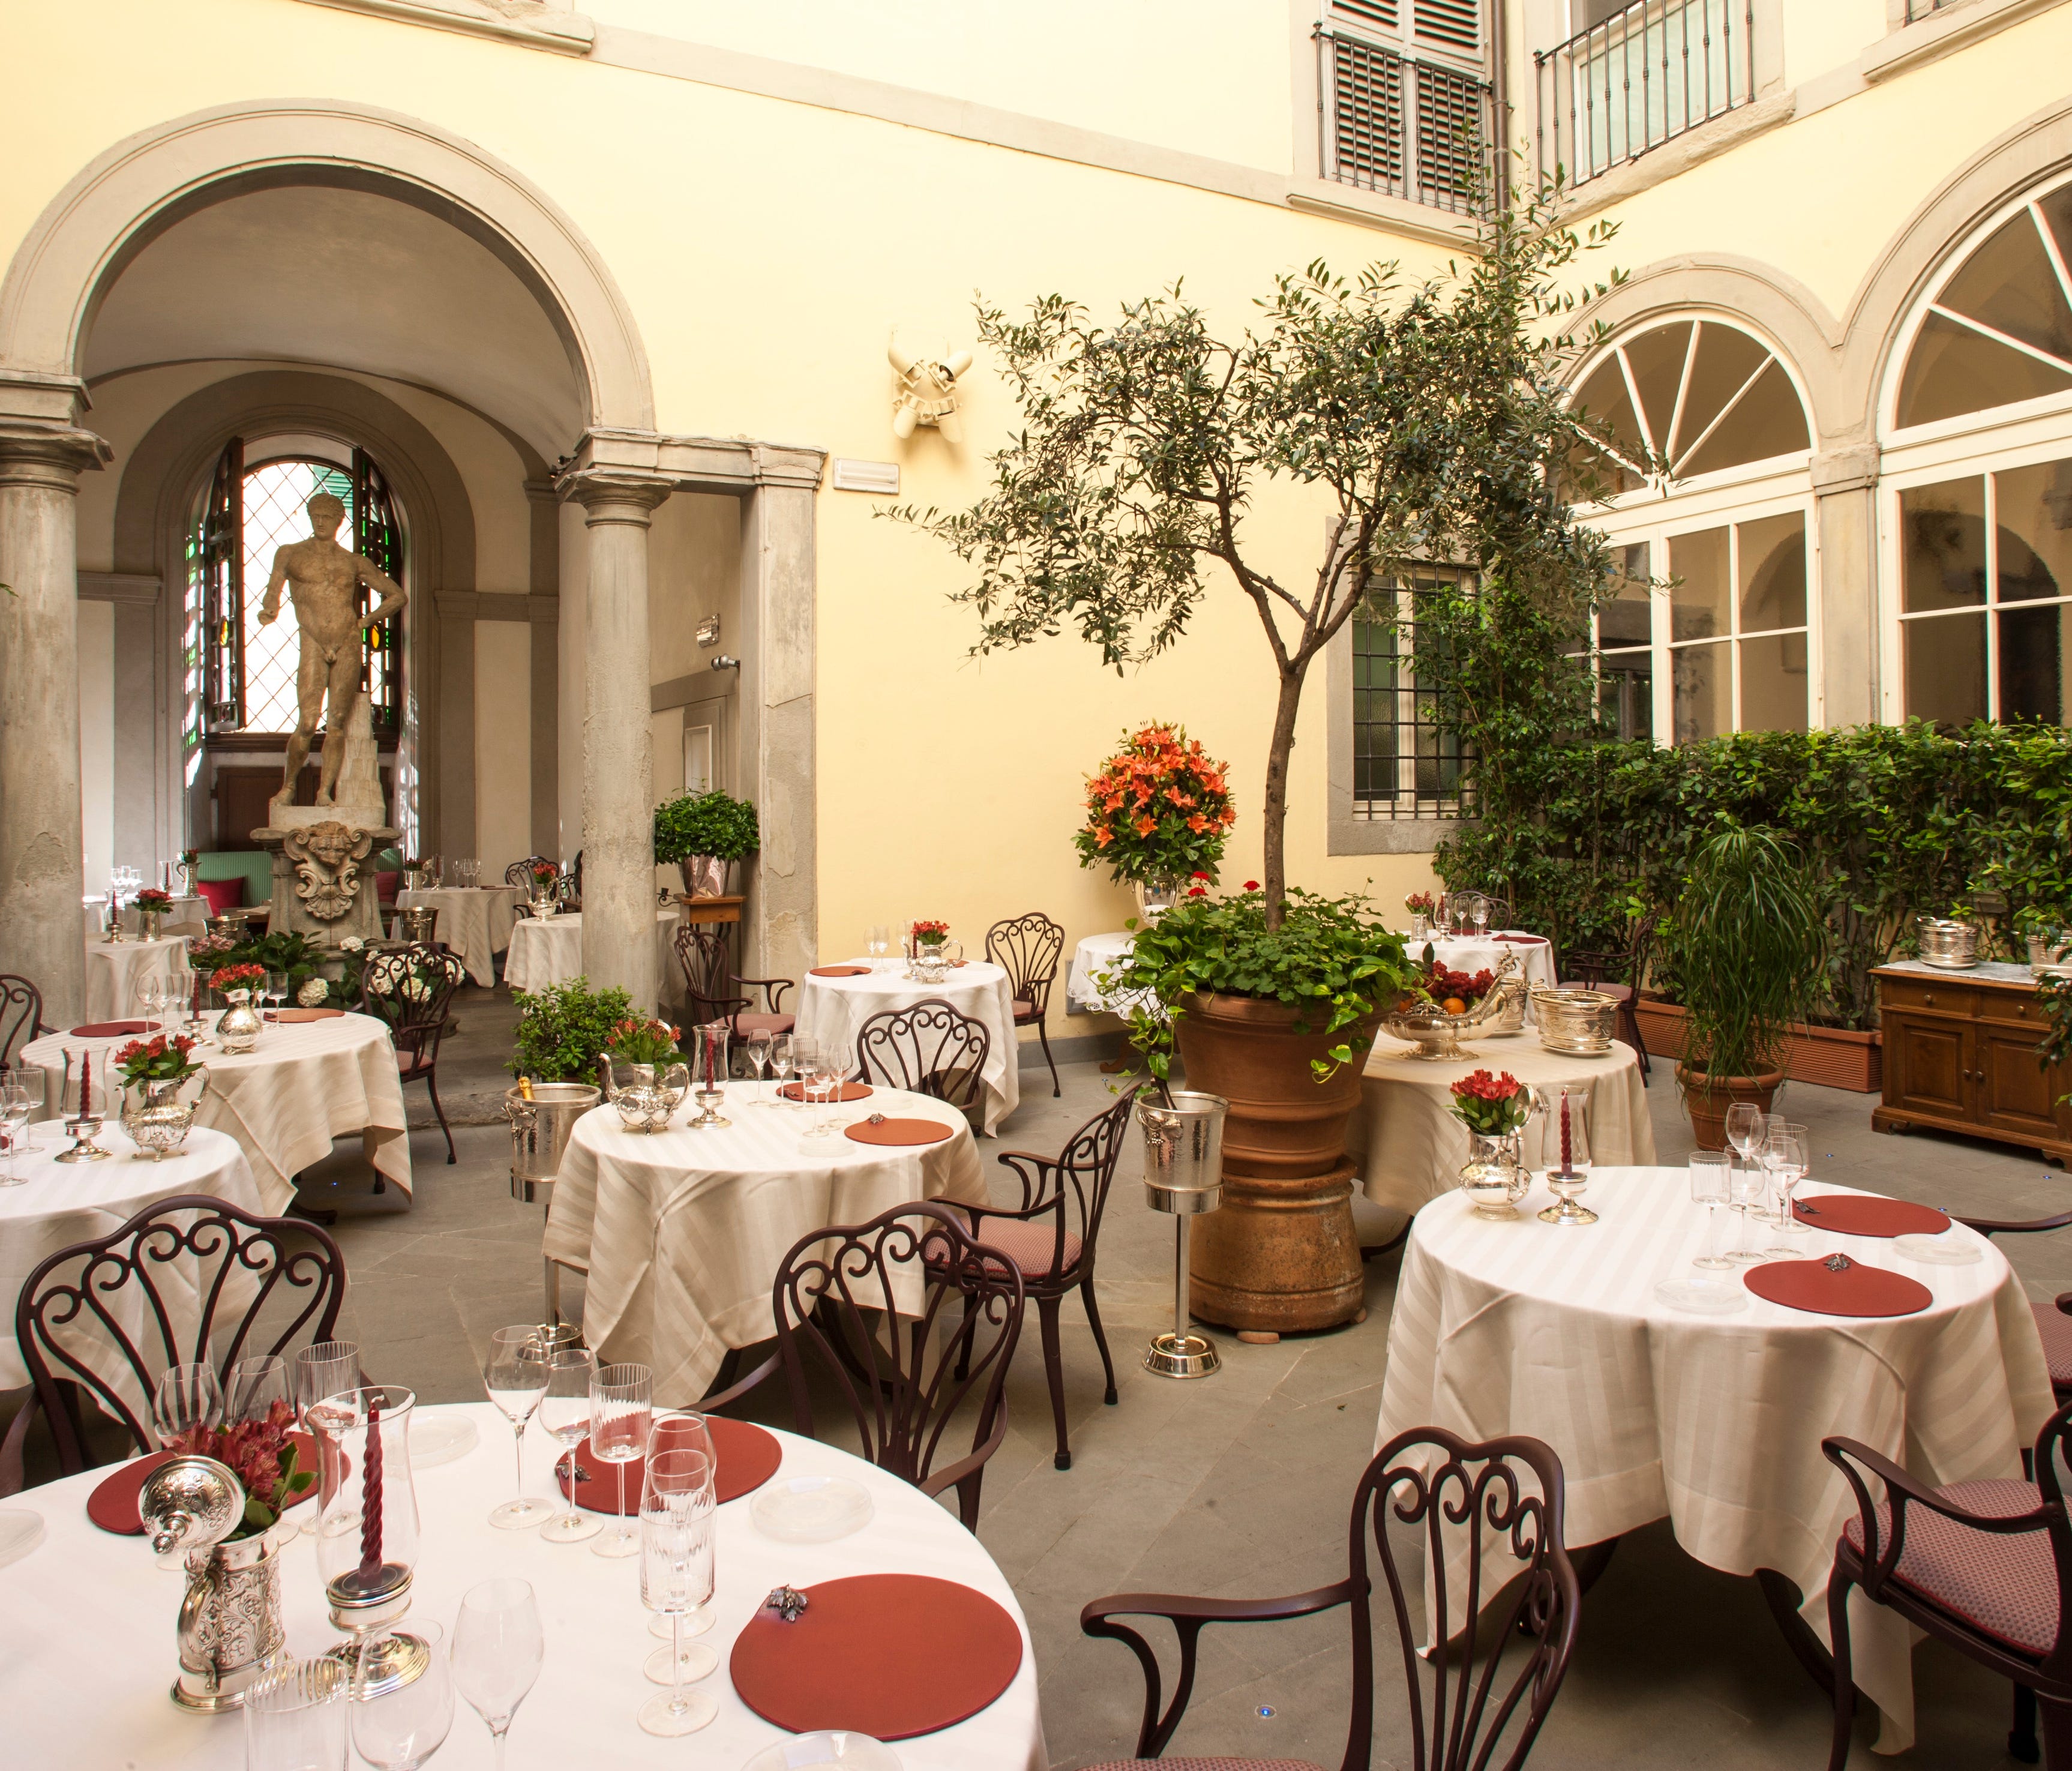 Enoteca Pinchiorri, located in the same building as the five-star Relais Santa Croce, has earned three Michelin stars under the ownership of Giorigio Pinchiorri and Annie Feolde. The restaurant serves regional Italian cuisine that can be ordered a la